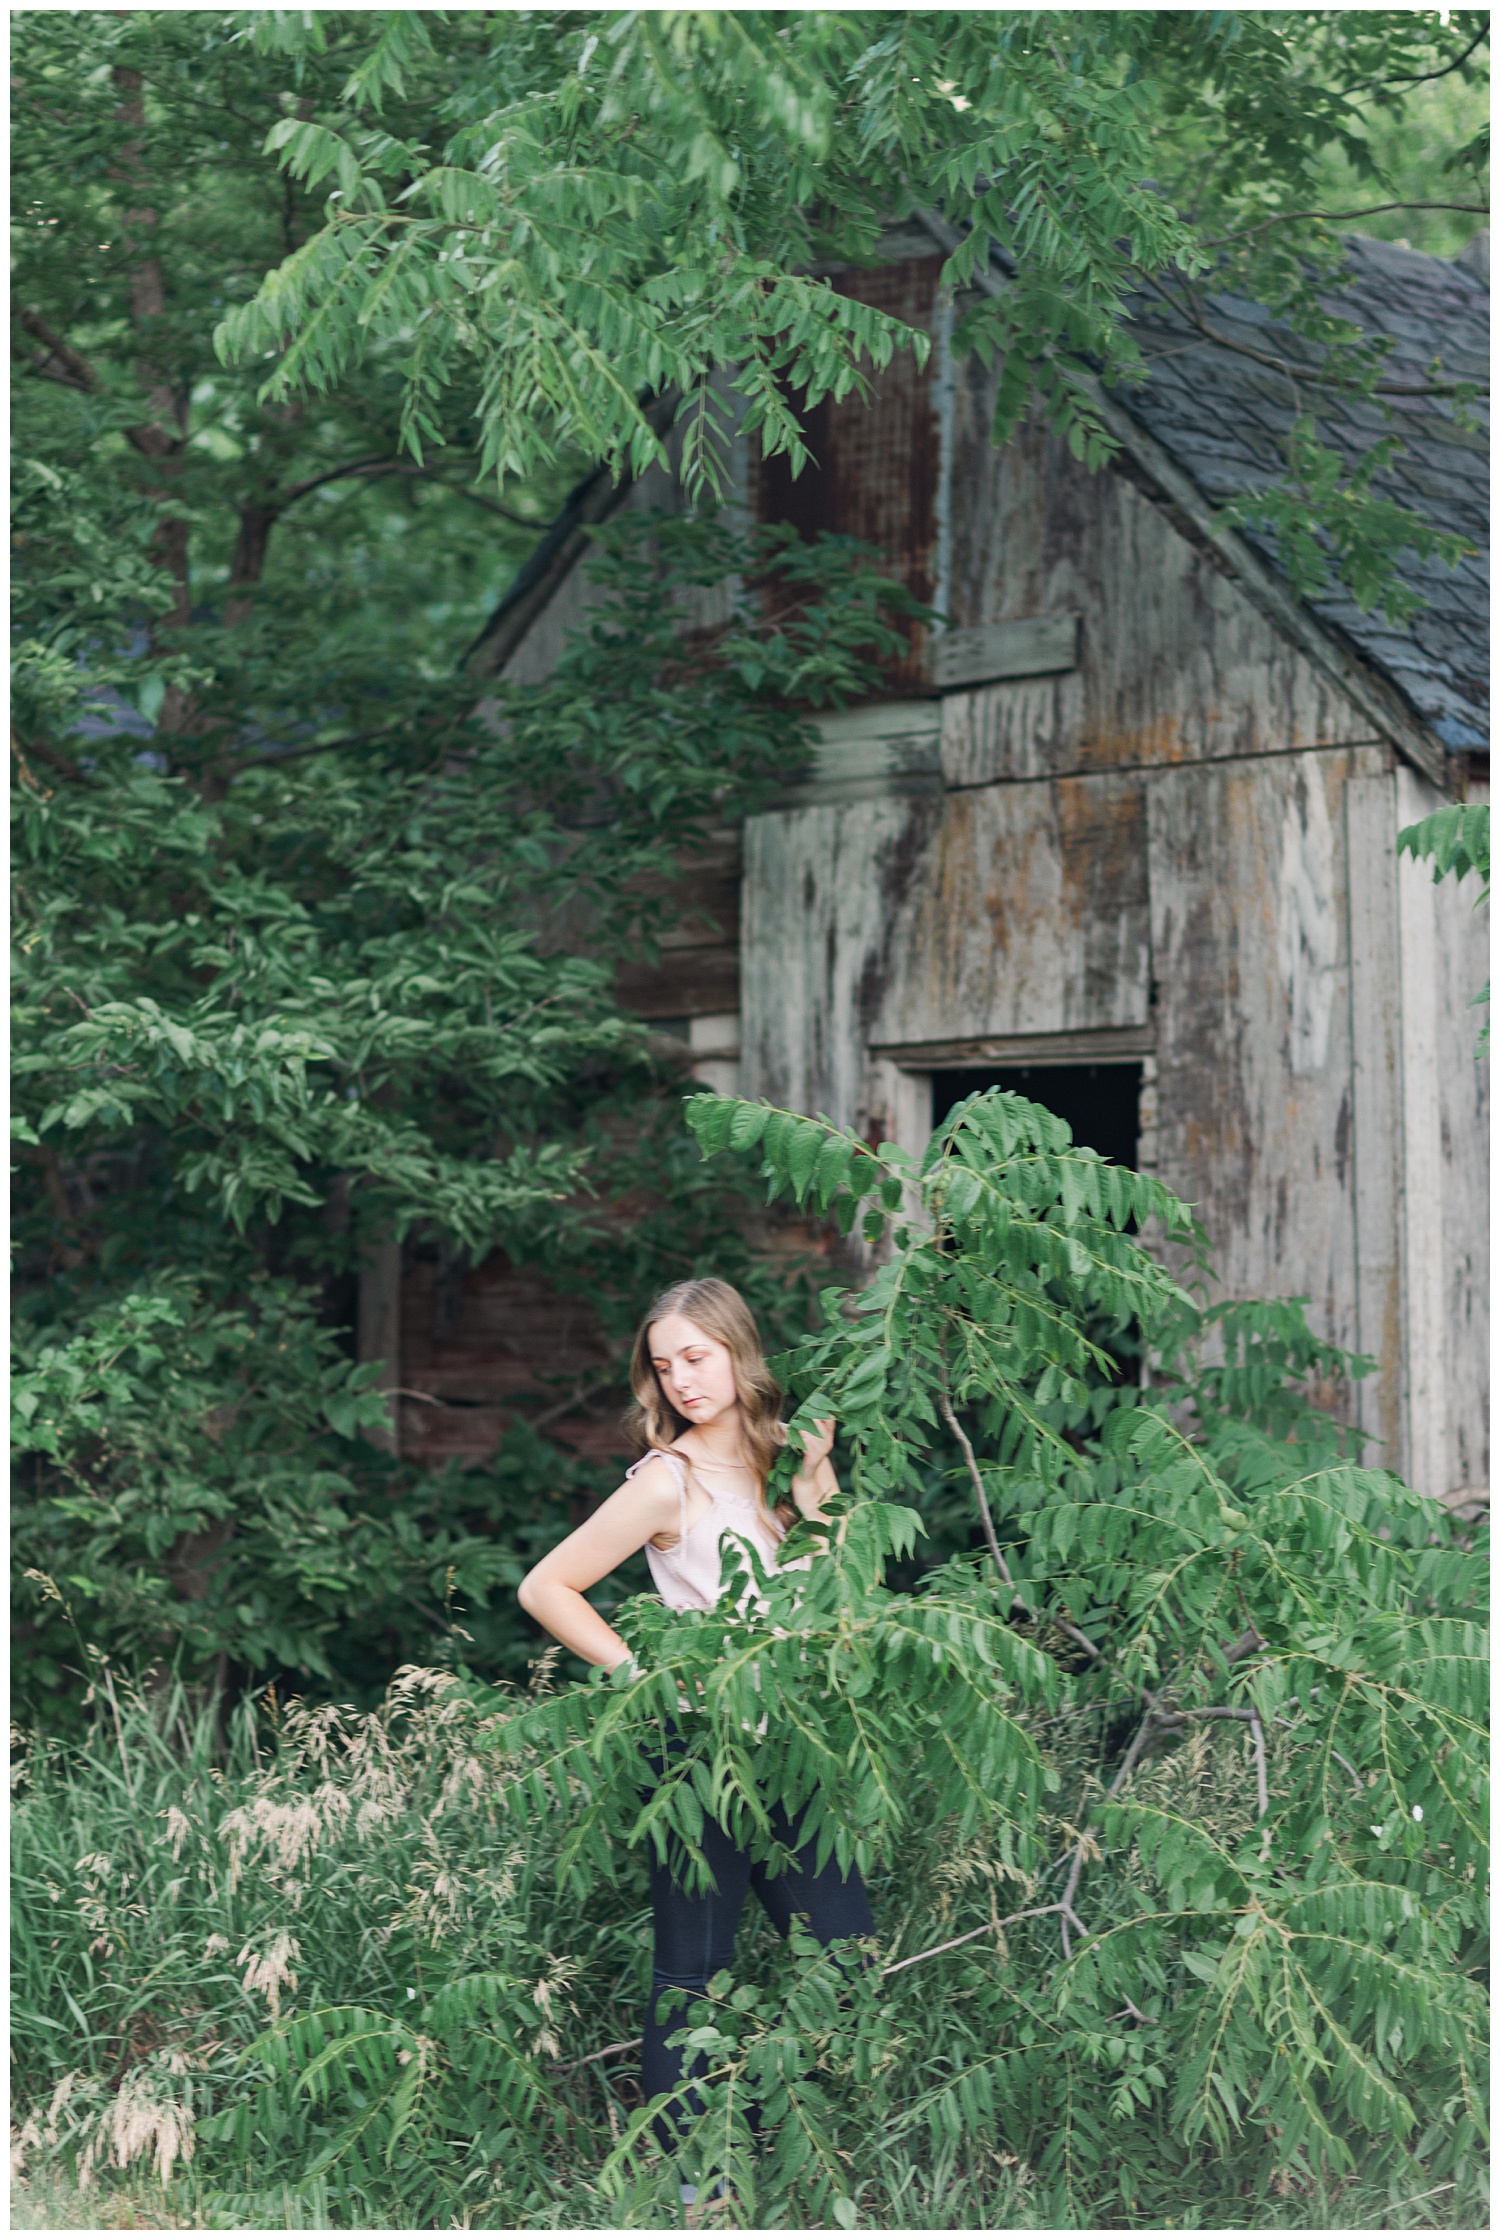 Senior Taylor looks down as she is surrounded by green foliage with a wood barn in the background | CB Studio